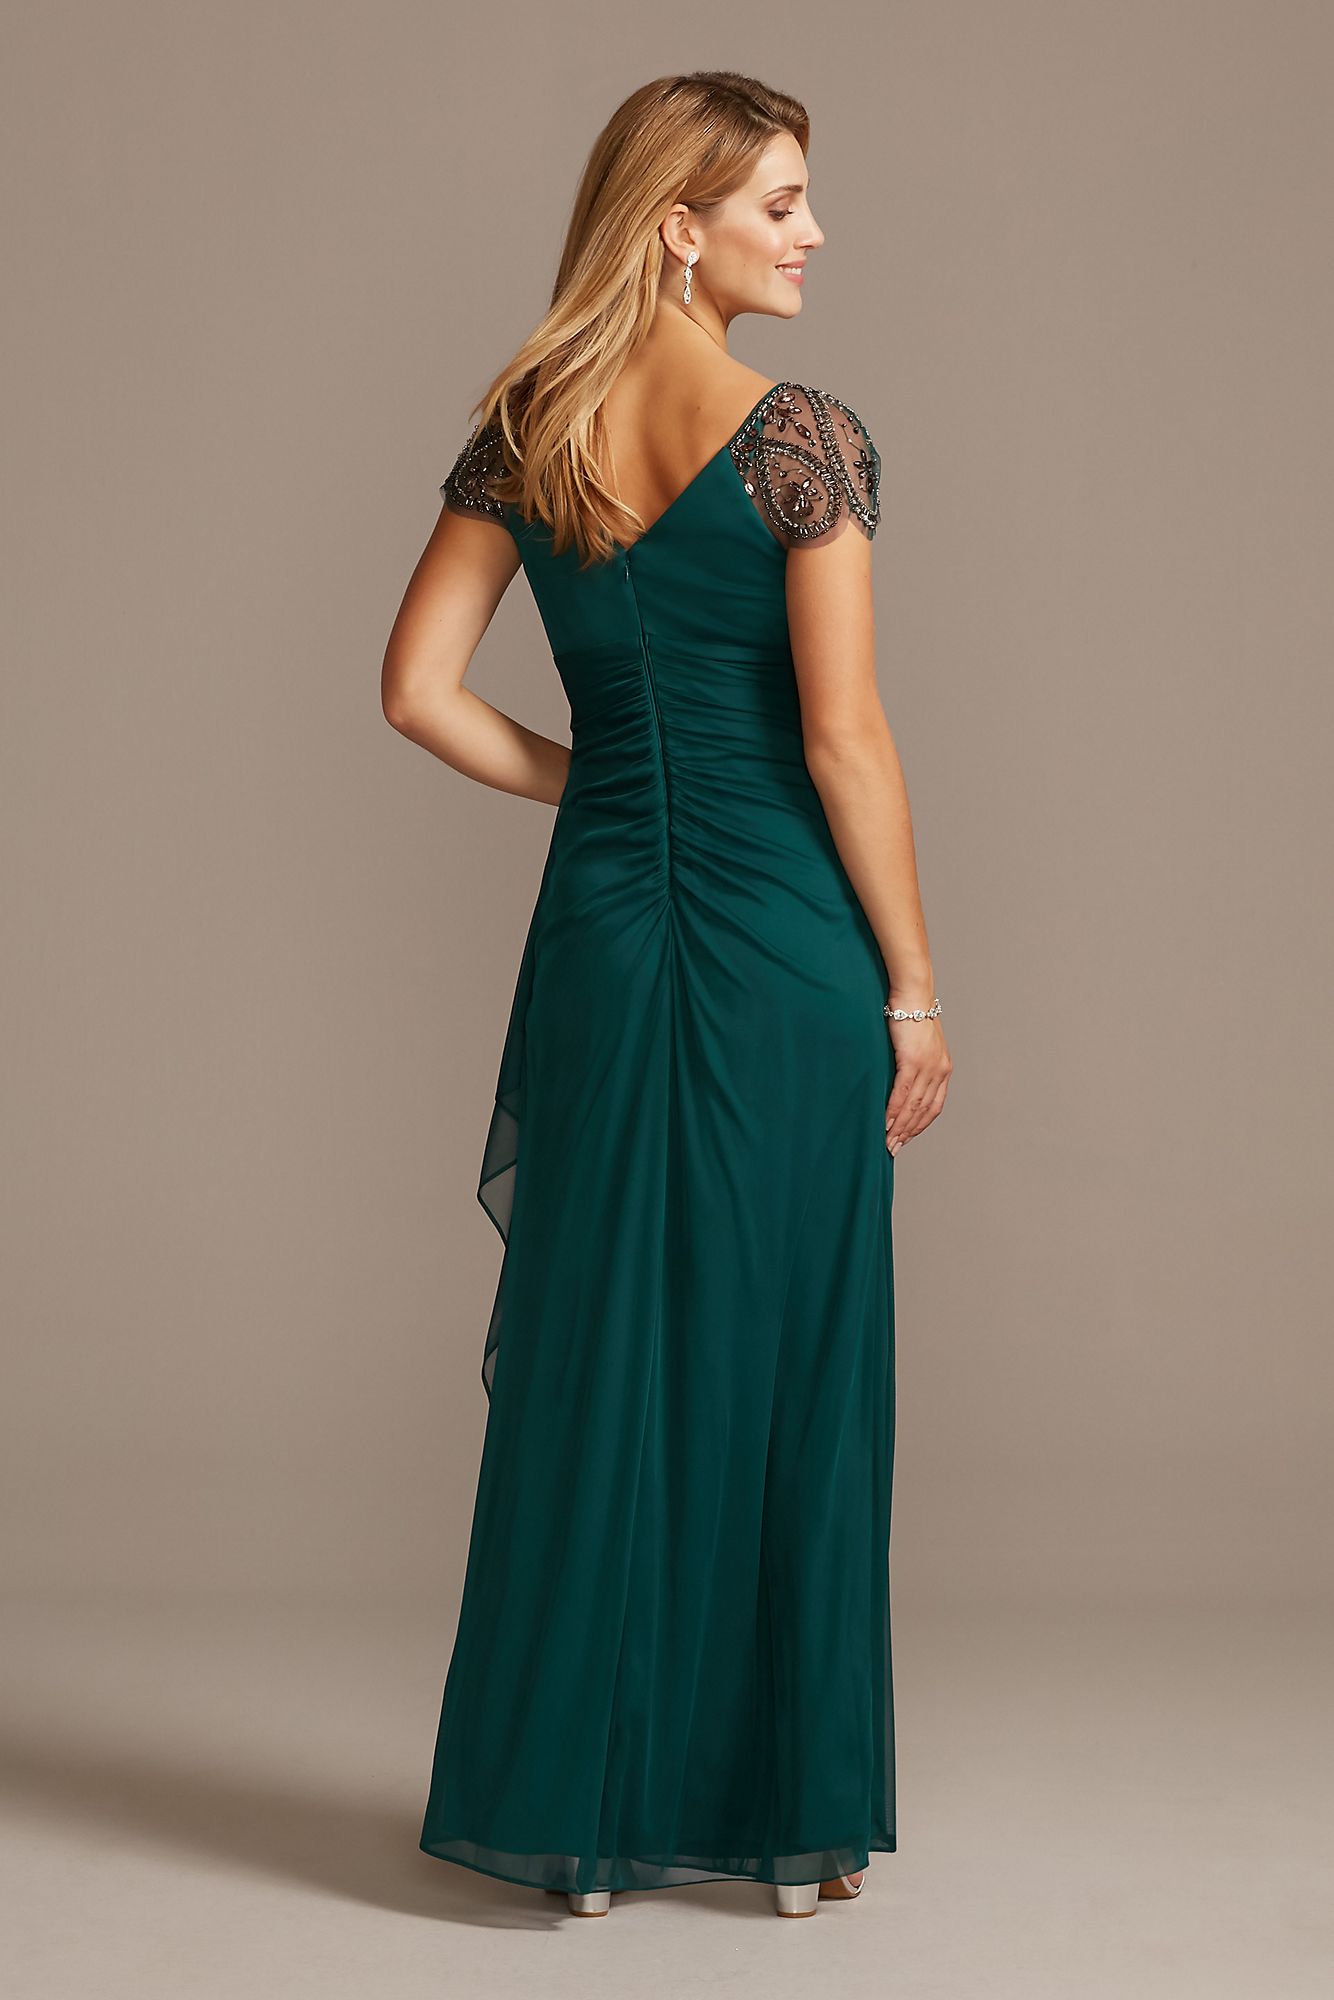 Embellished Chiffon Cap Sleeve Ruched Gown 2523X